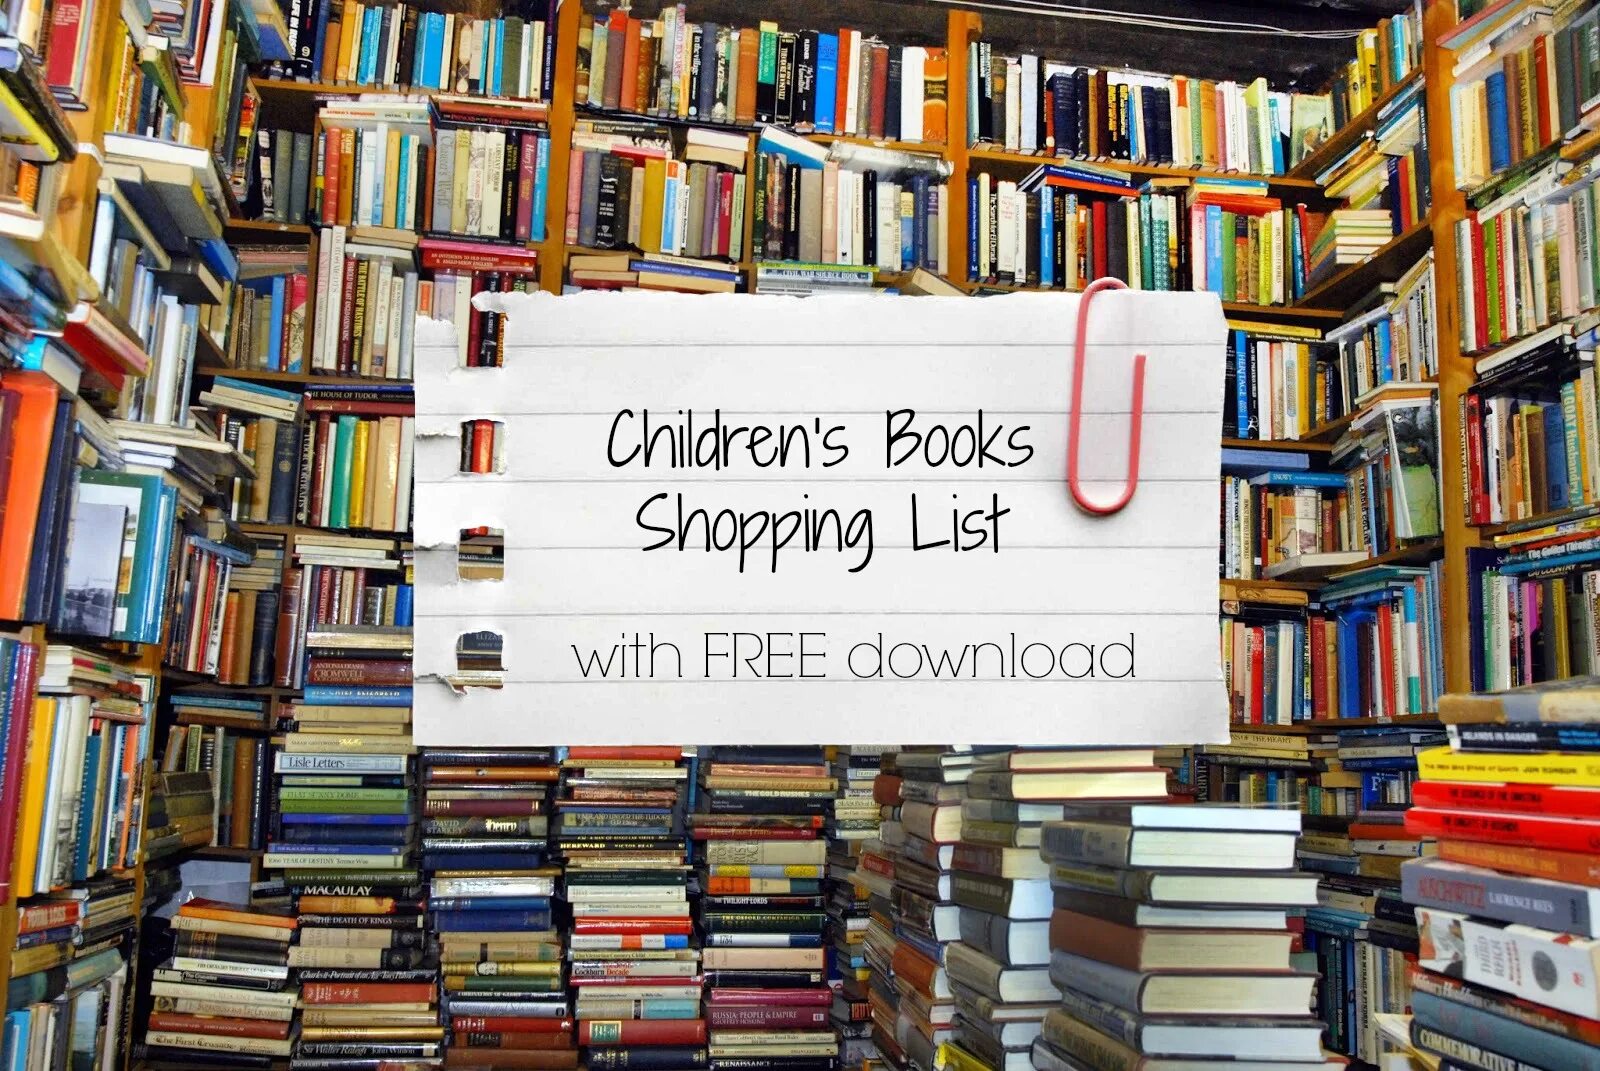 Best books shop. The sales book. Books for children. Books for sale. Gif shop книга.